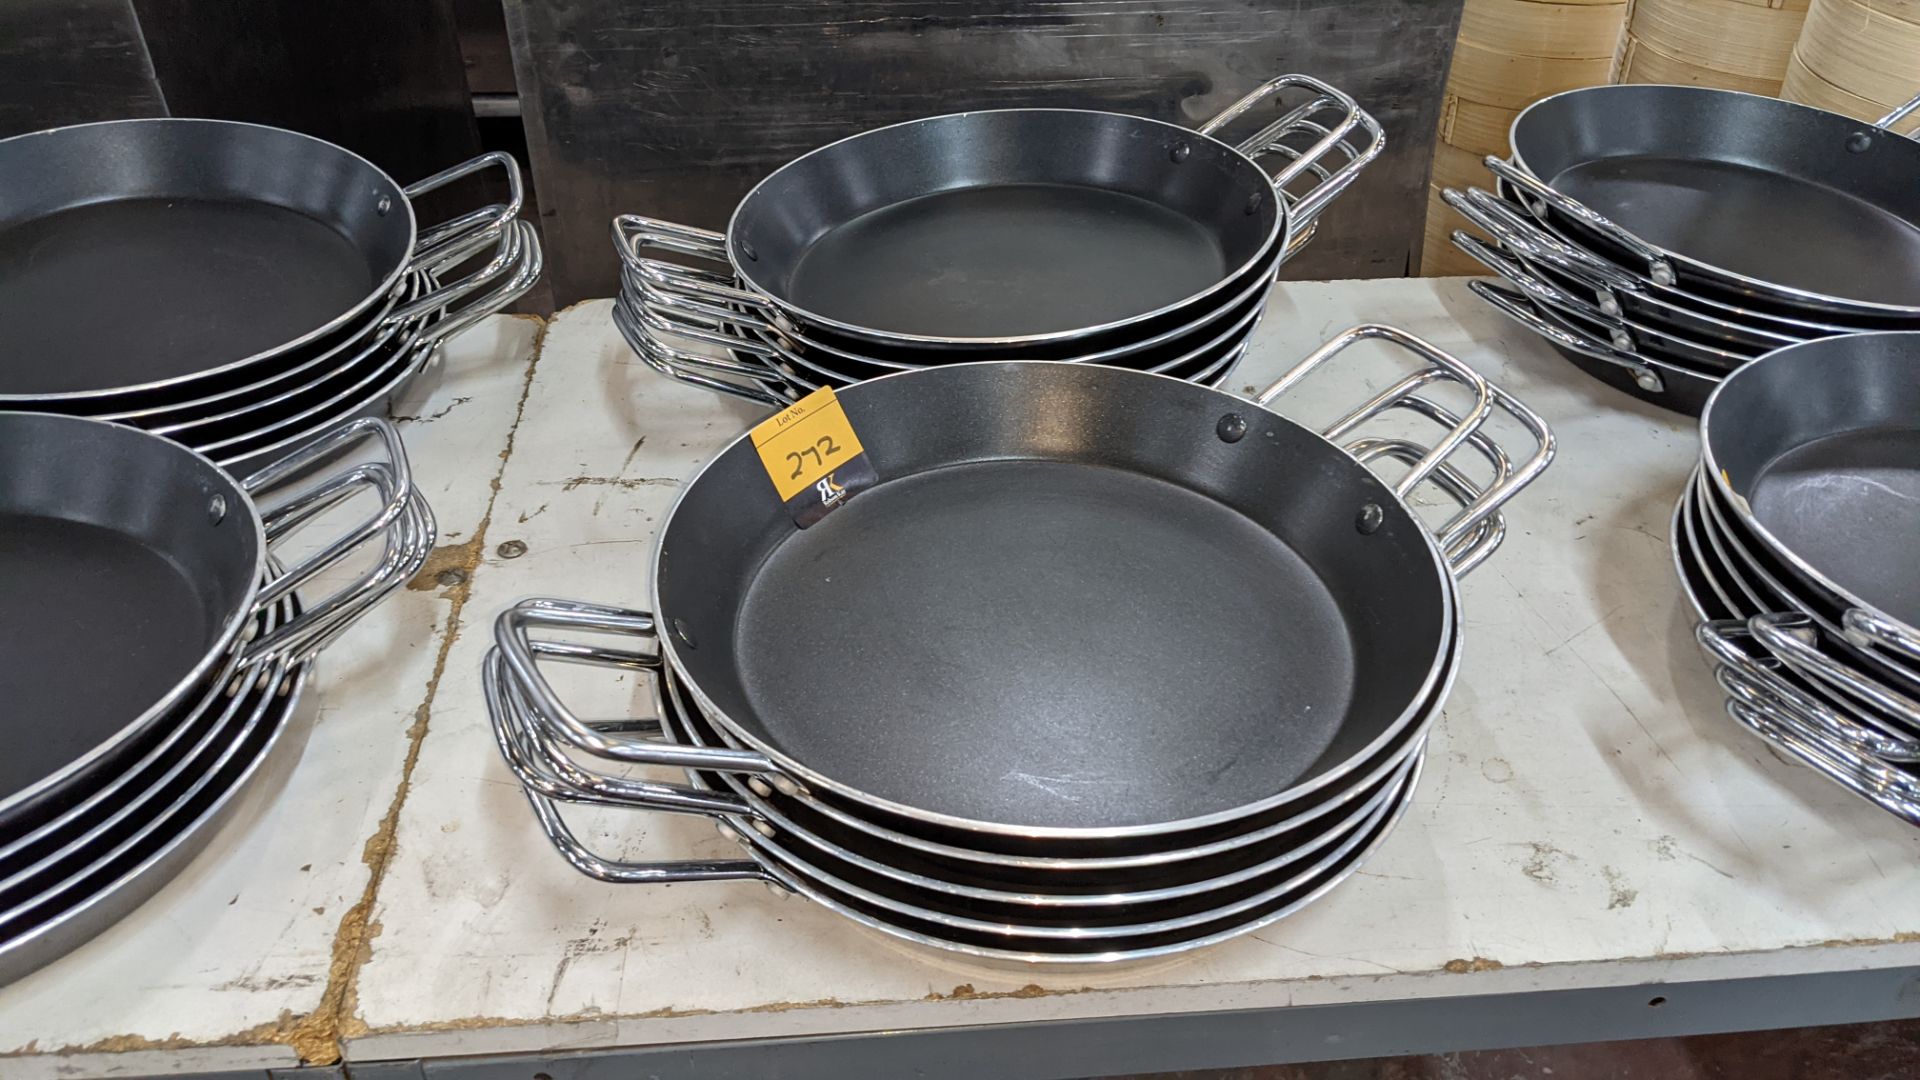 10 off 30cm aluminium non-stick paella pans with twin handles NB. Diameter references the size exclu